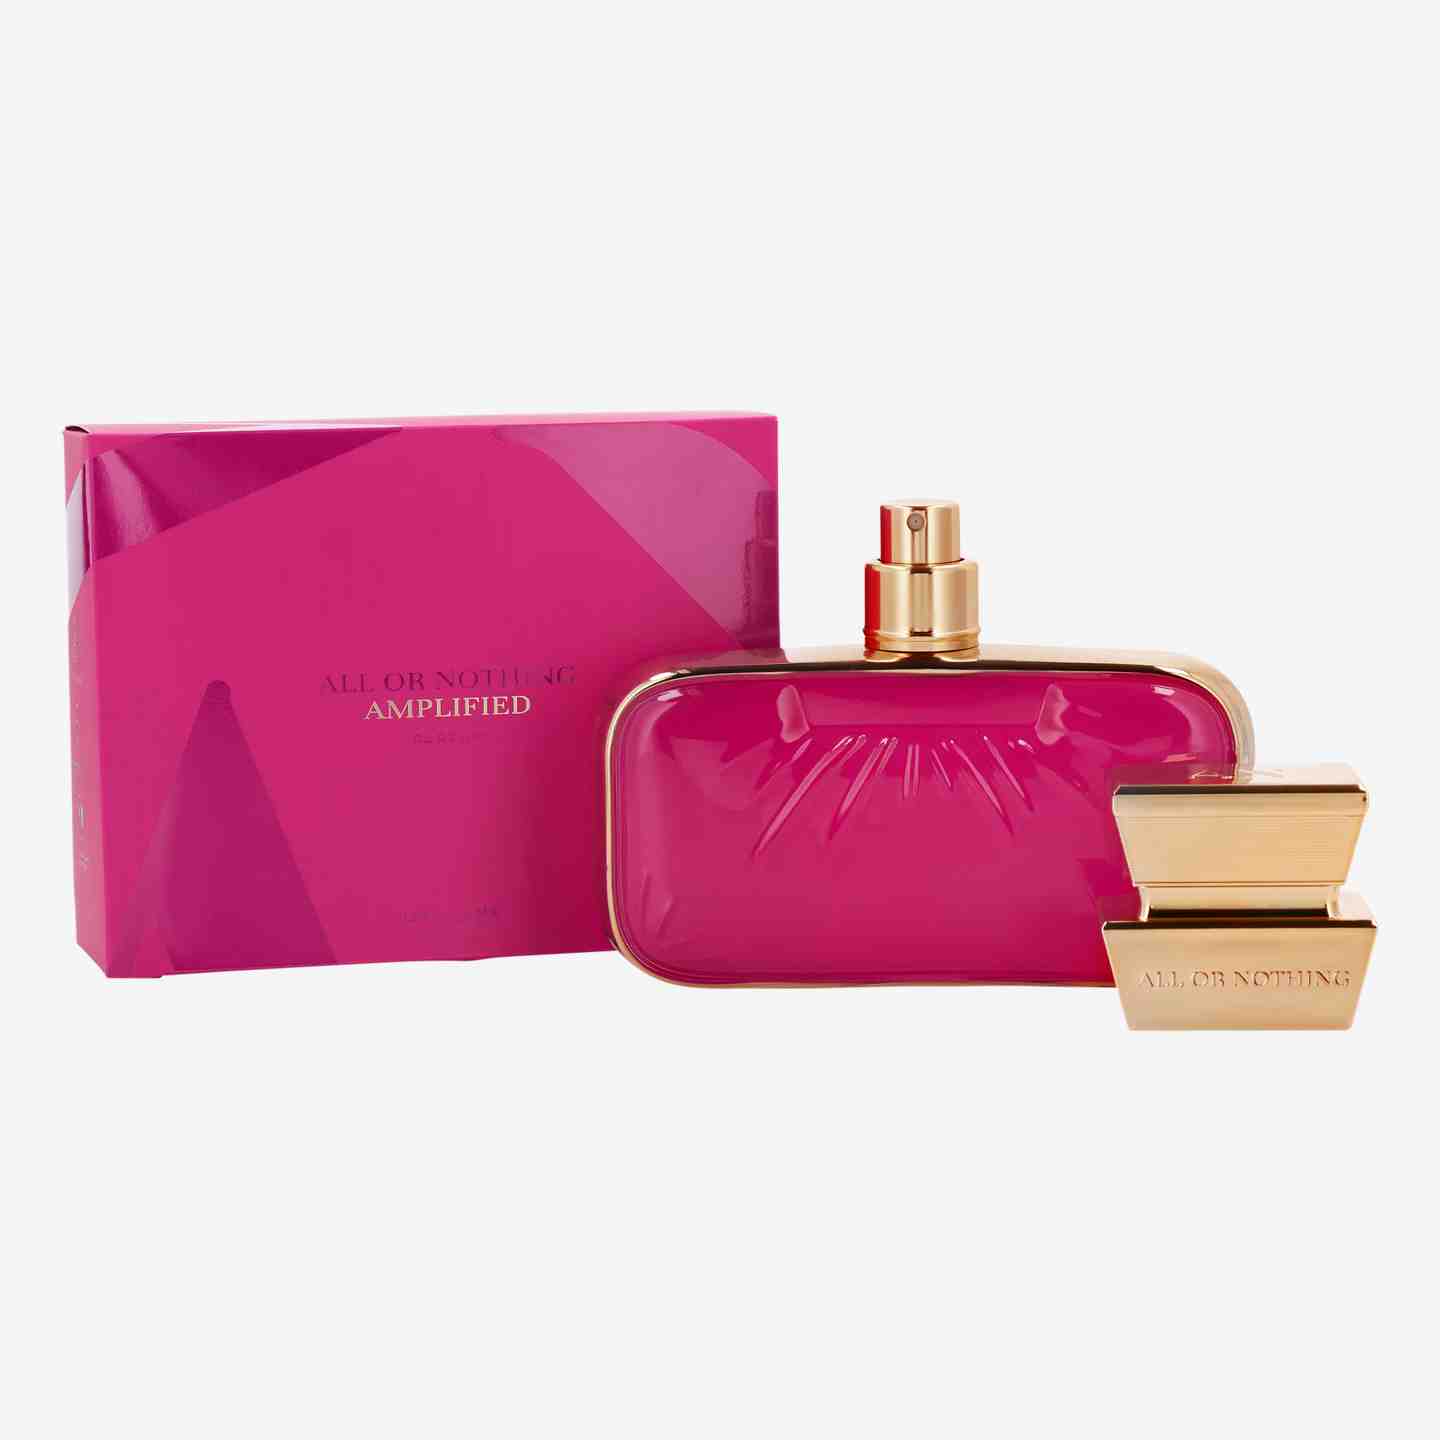 Parfum All or Nothing Amplified (46060)